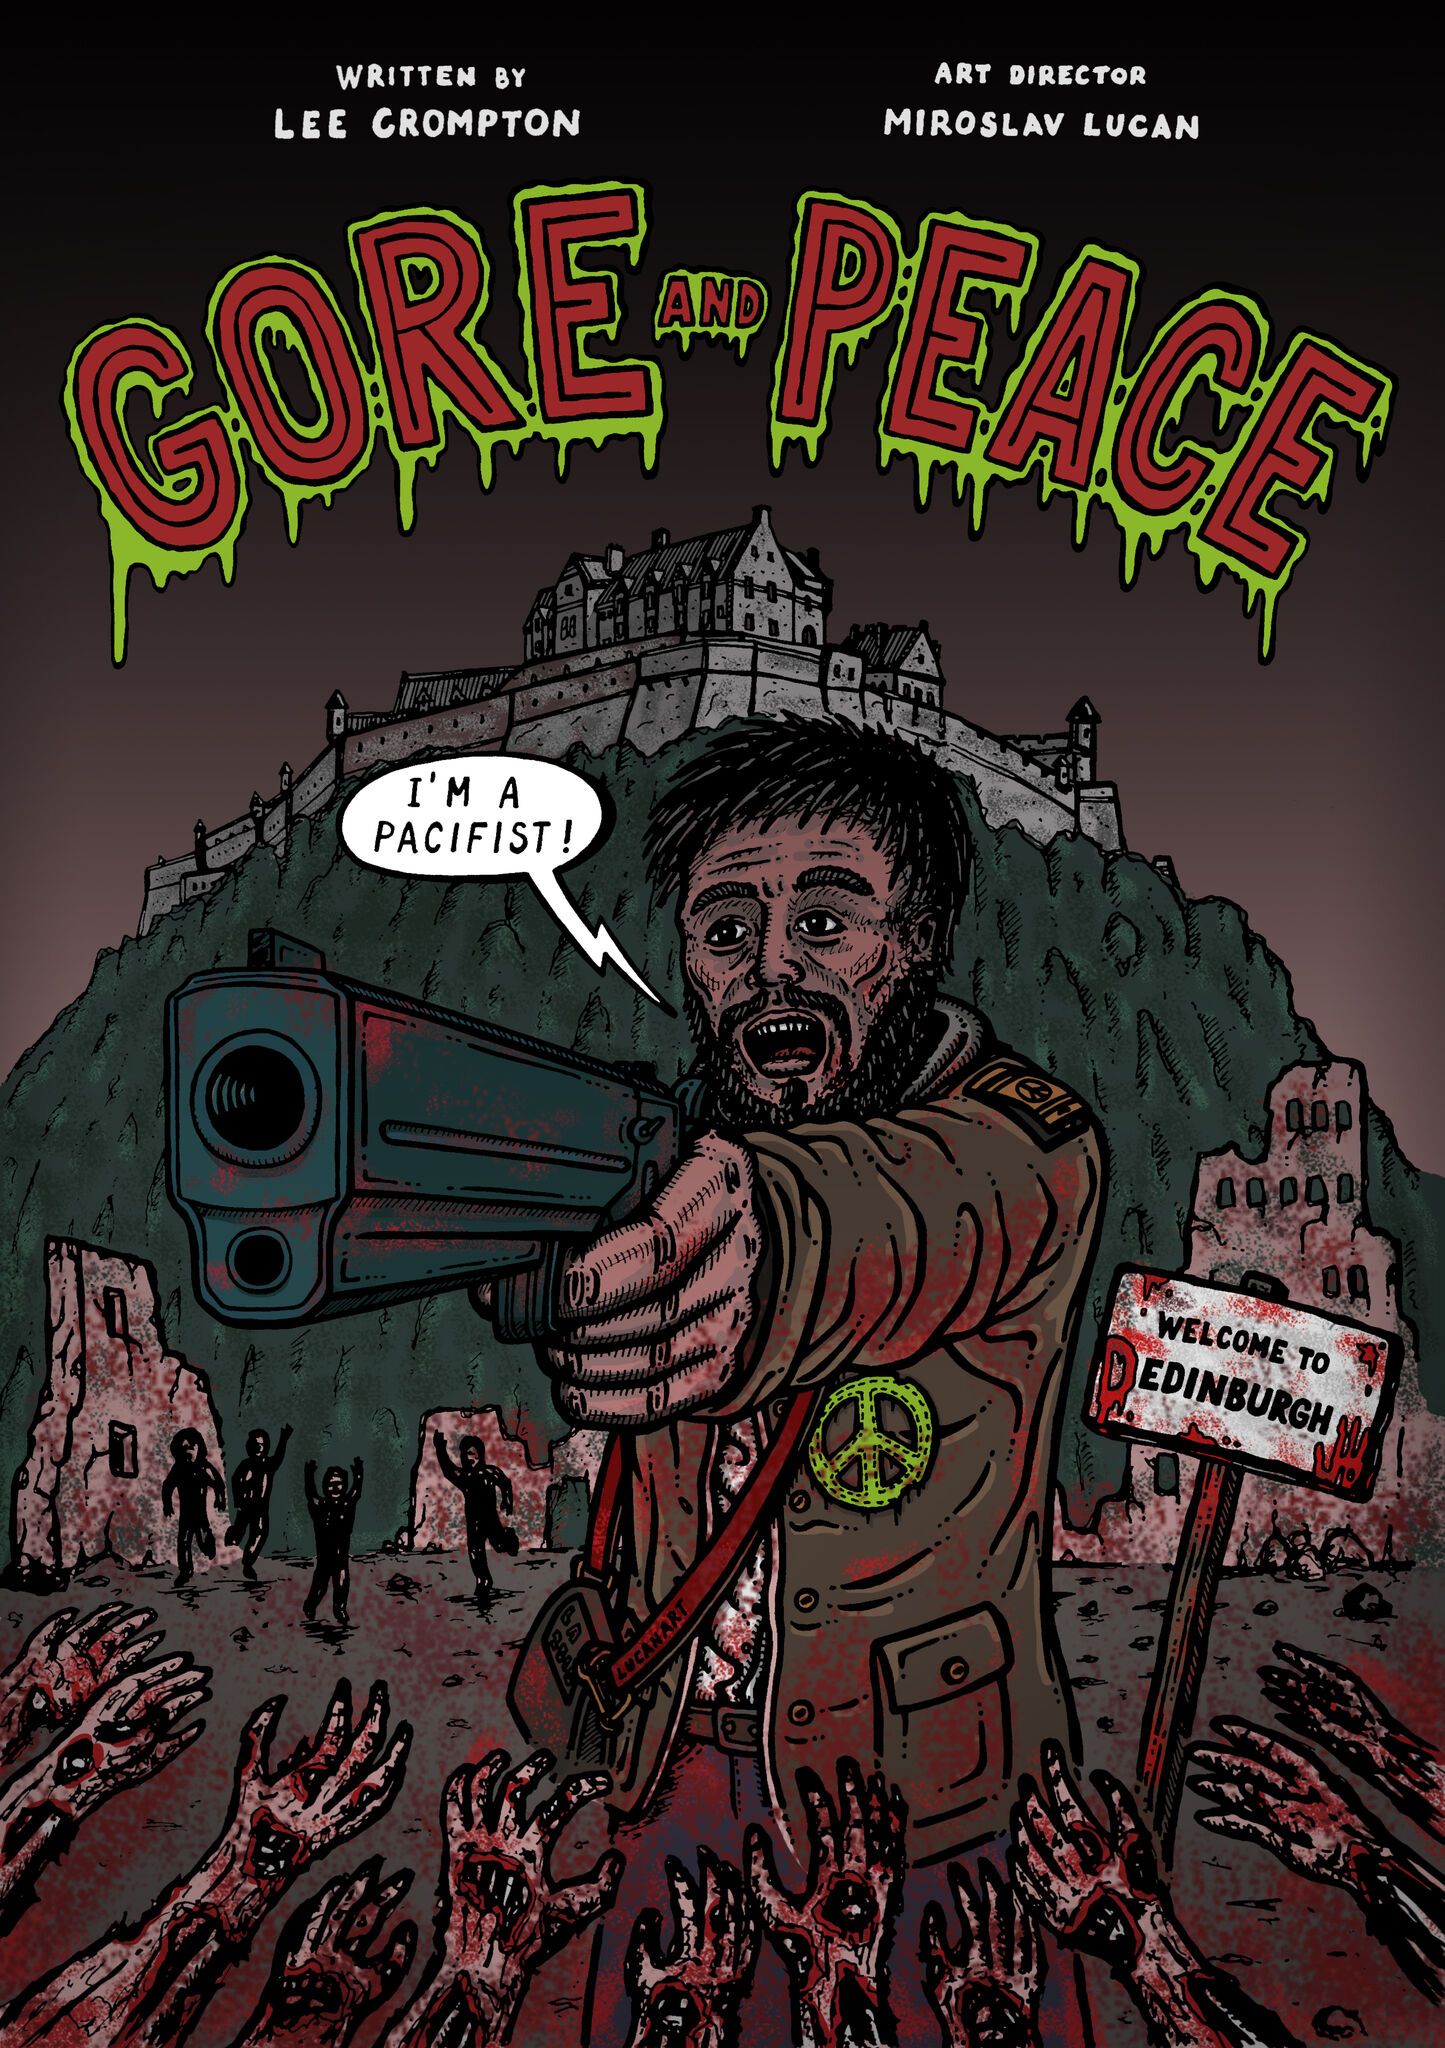 GORE AND PEACE